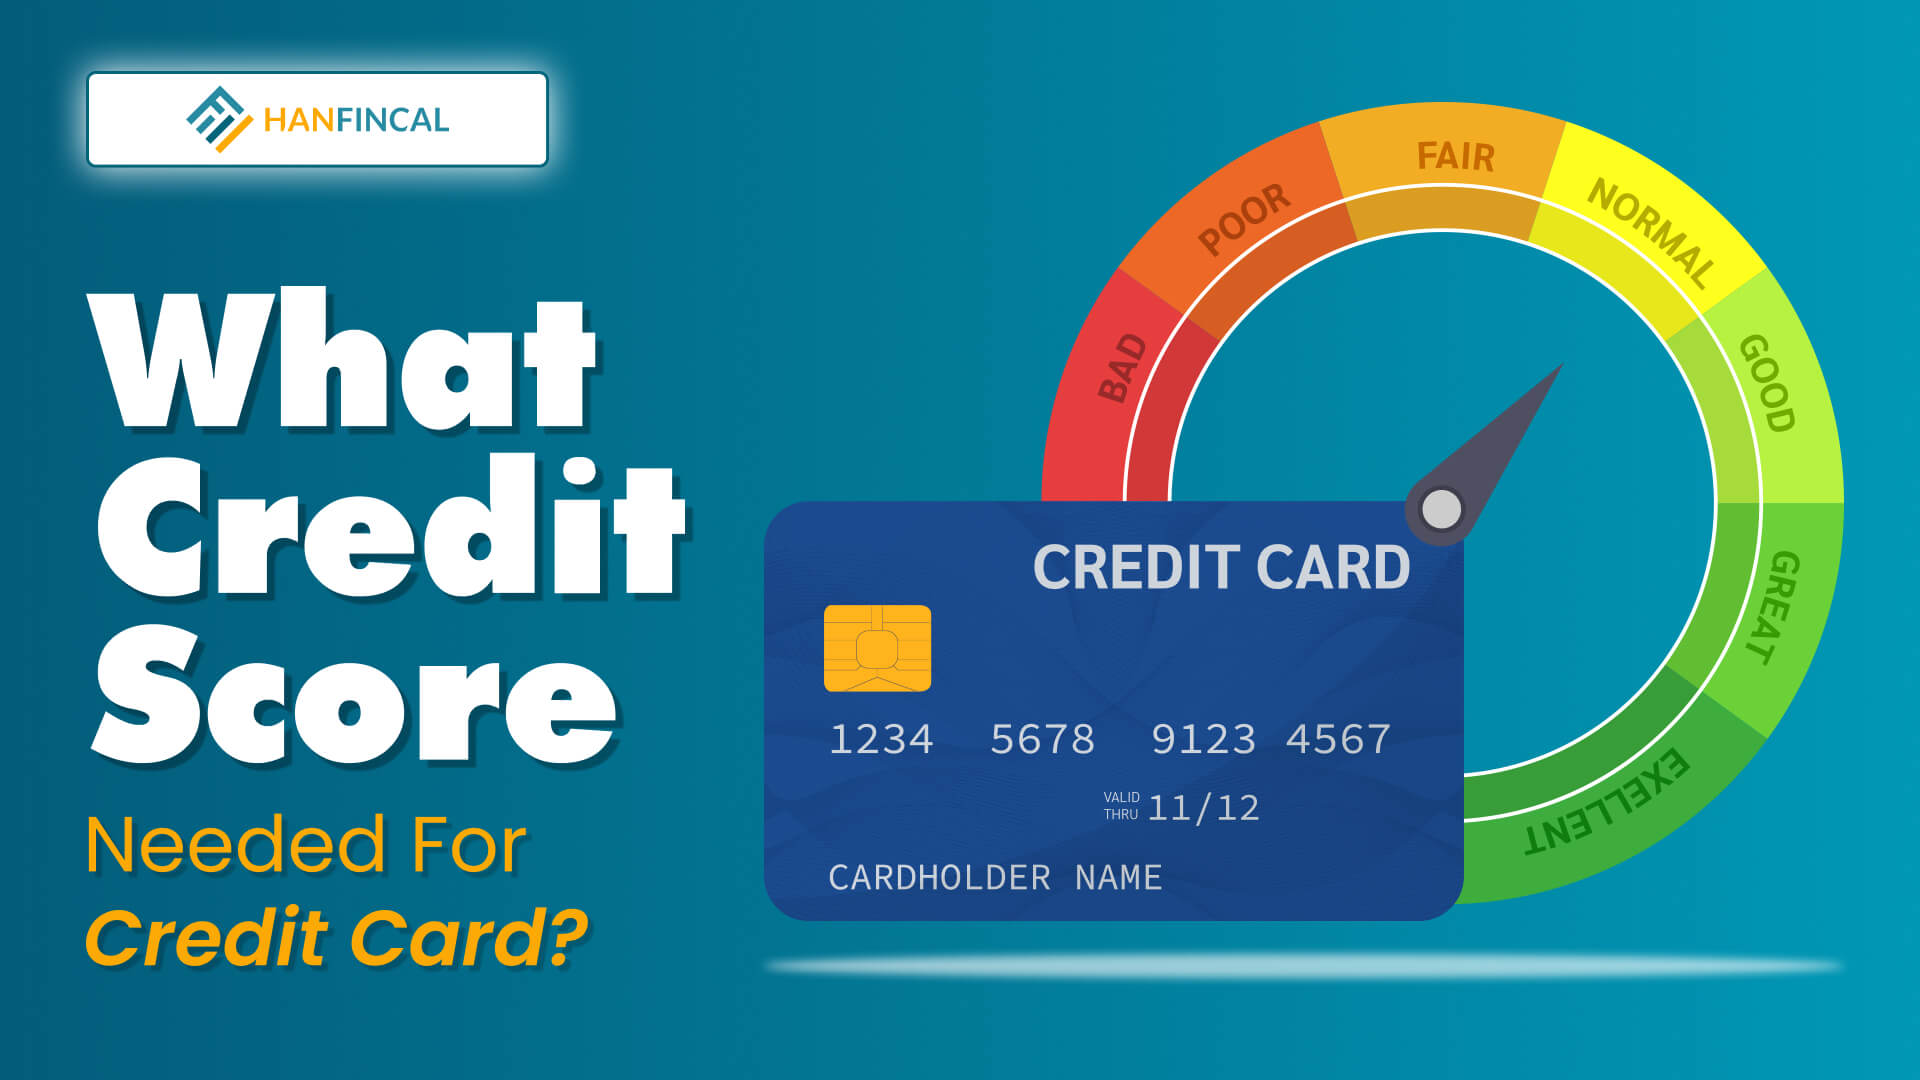 What Credit Score Is Needed For A Credit Card? - Hanfincal